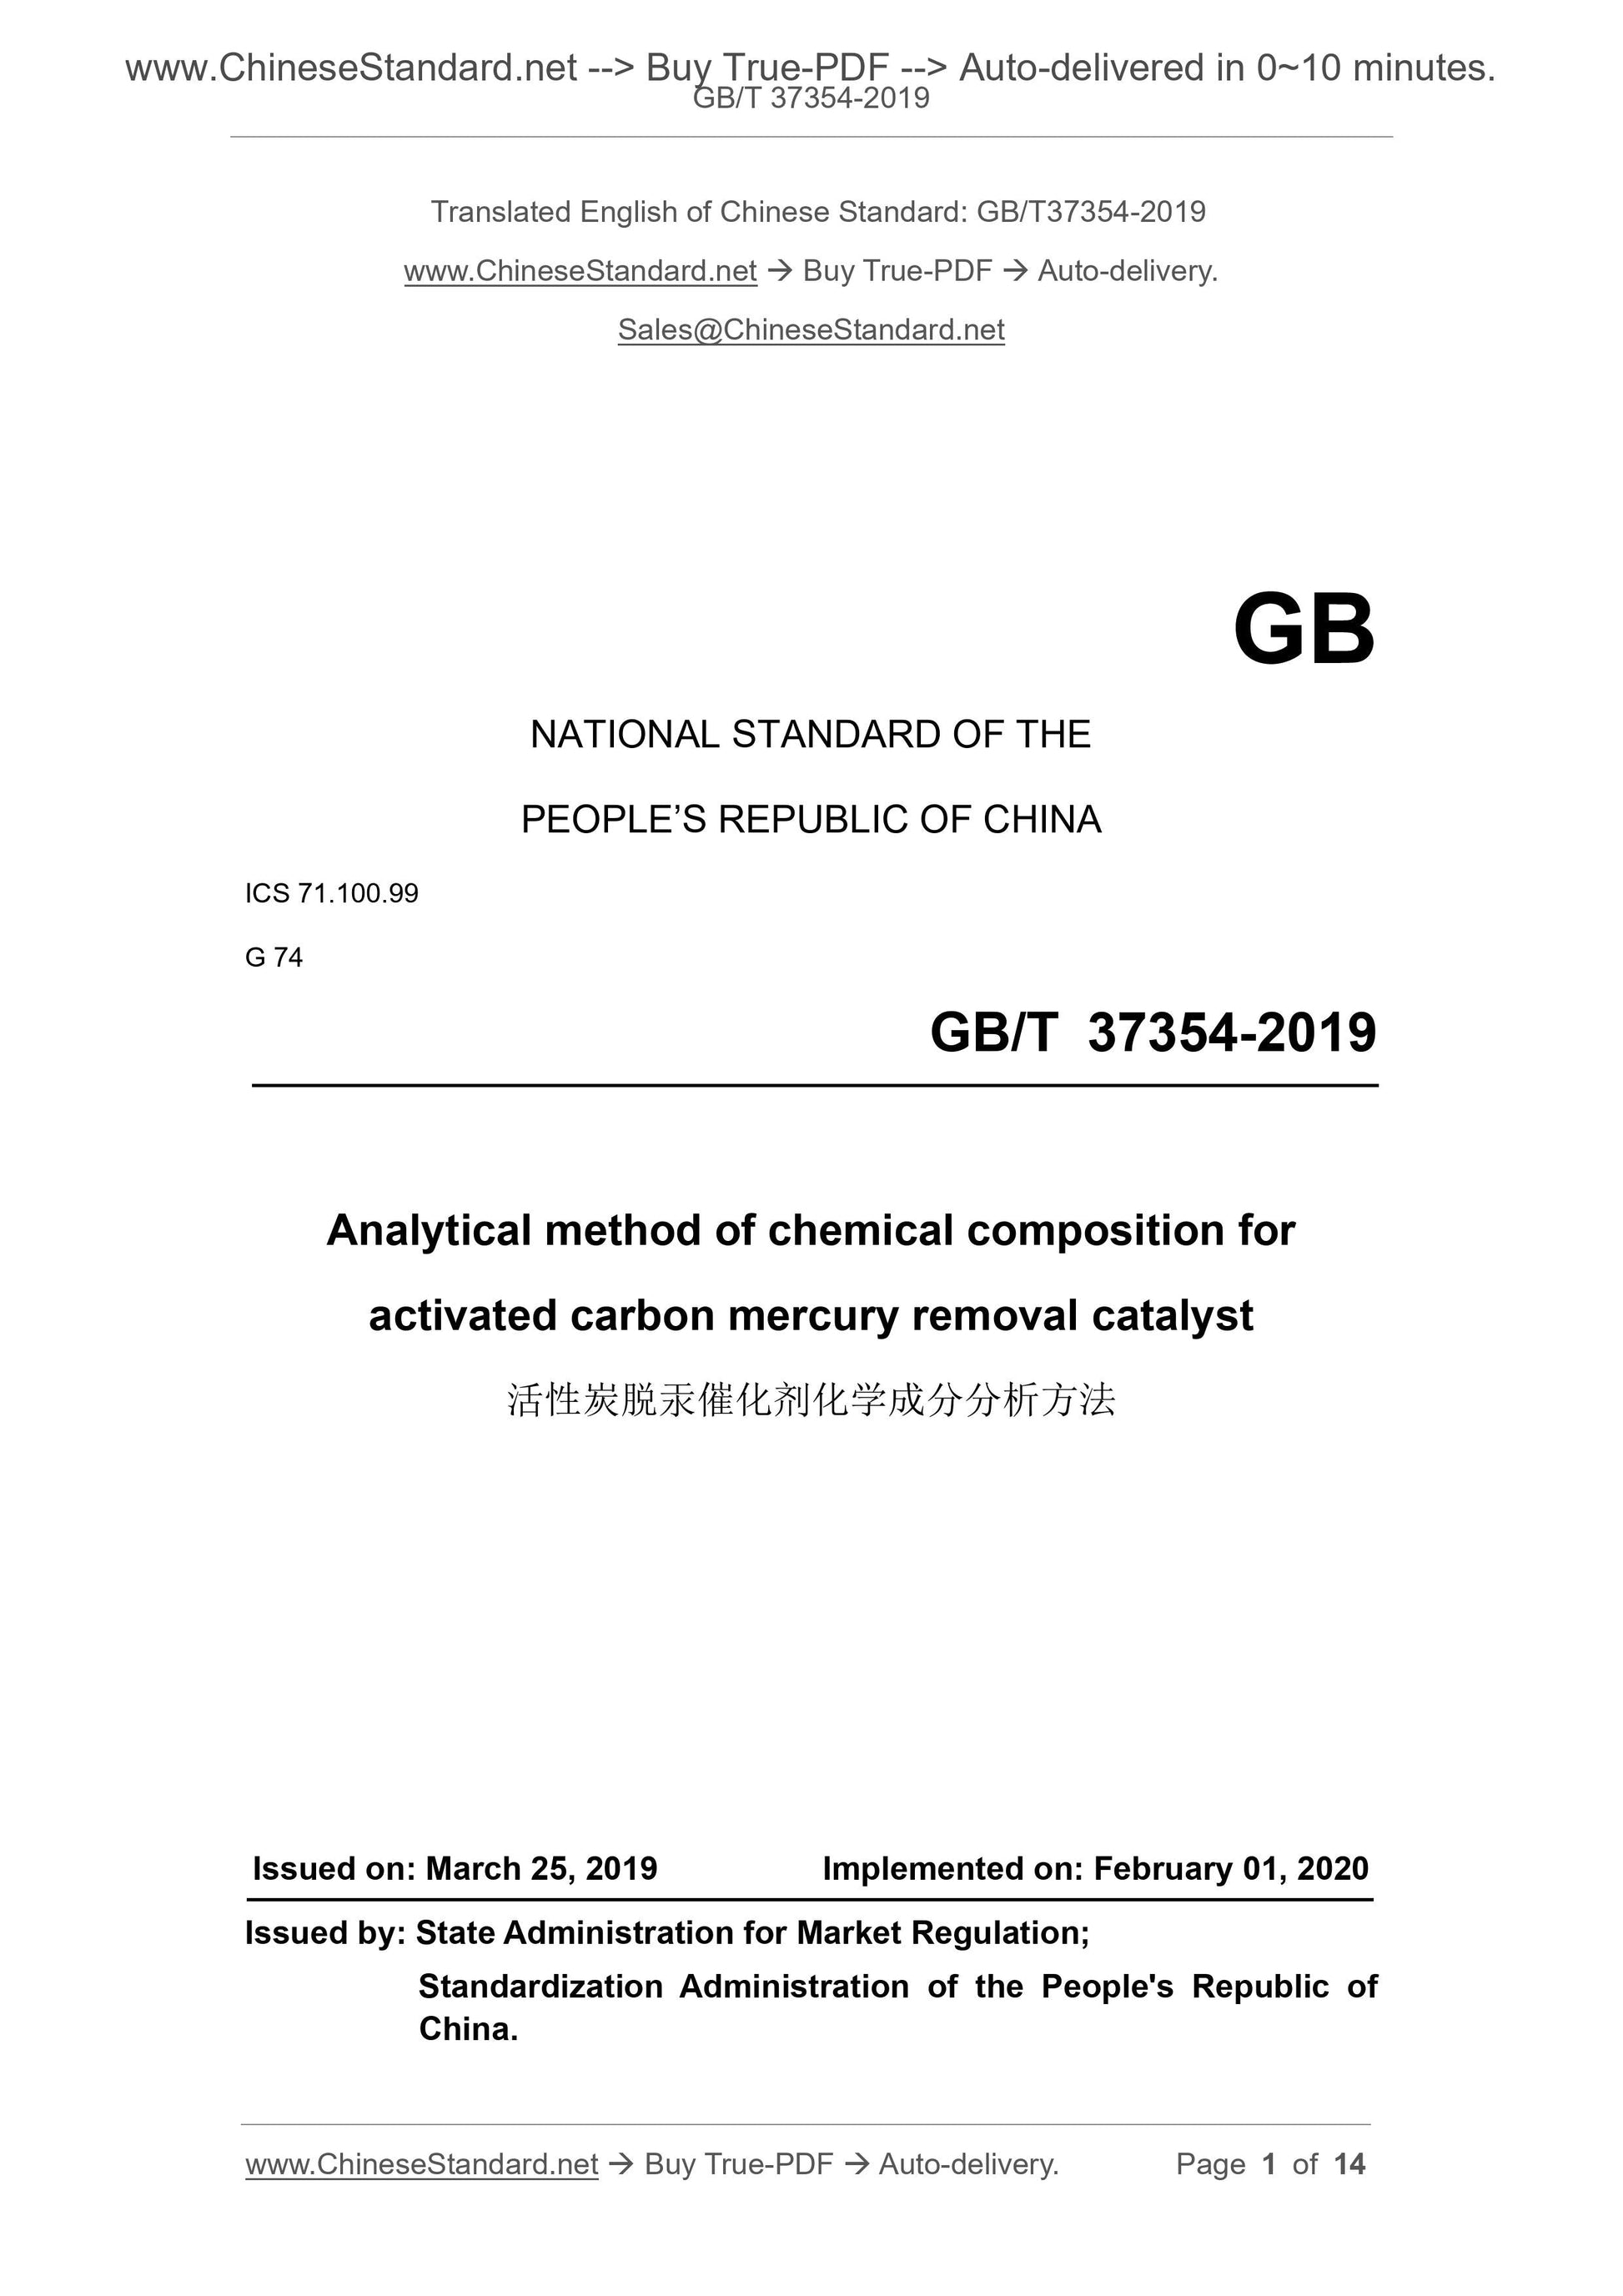 GB/T 37354-2019 Page 1